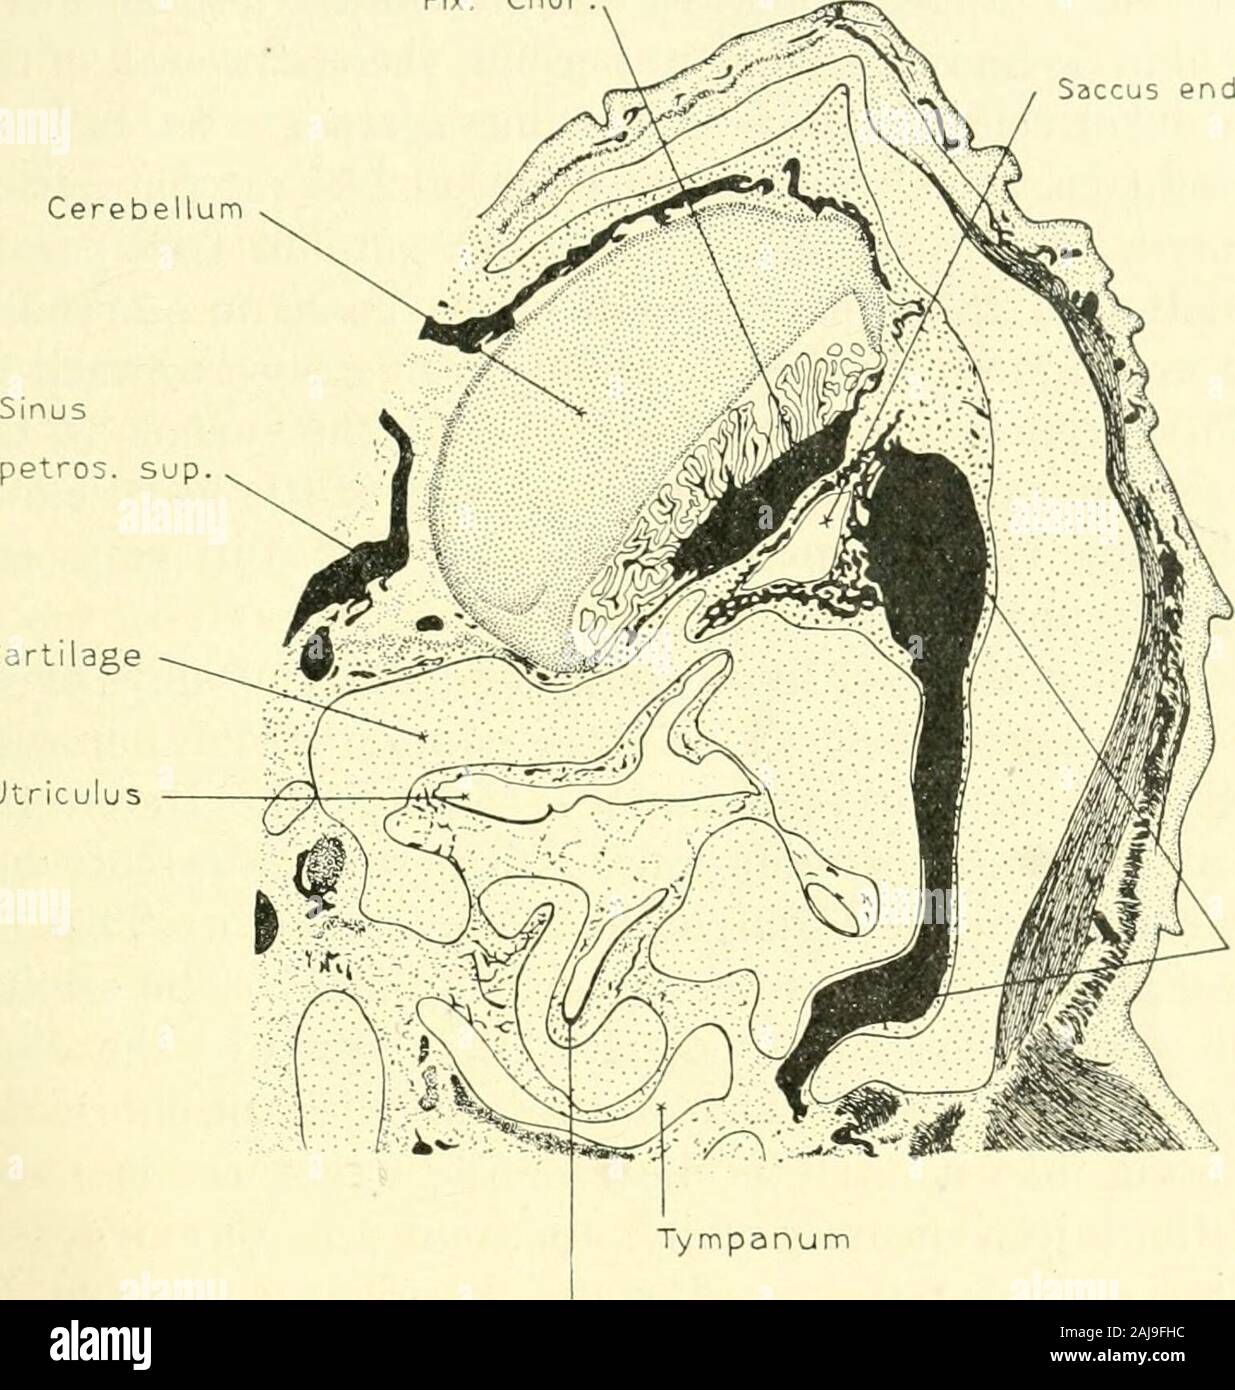 The American journal of anatomy . ^separated from it as the dural and arachnoidal tissues become-differentiated. On the other hand, though resting against thetransverse sinus, there is a scant amount of loose embryonicconnective tissue separating the two. Running through themeshes of this connective tissue can be seen blood capillariesthat form a plexus which empties into the transverse sinus. Thisplexus anastomoses with the vessels of the labyrinth bj^ com- VASCULAR DRAINAGE OF ENDOLYMPHATIC SAC 77 munications along the endolymphatic appendage. It also an-astomoses with the posterior dural pl Stock Photo